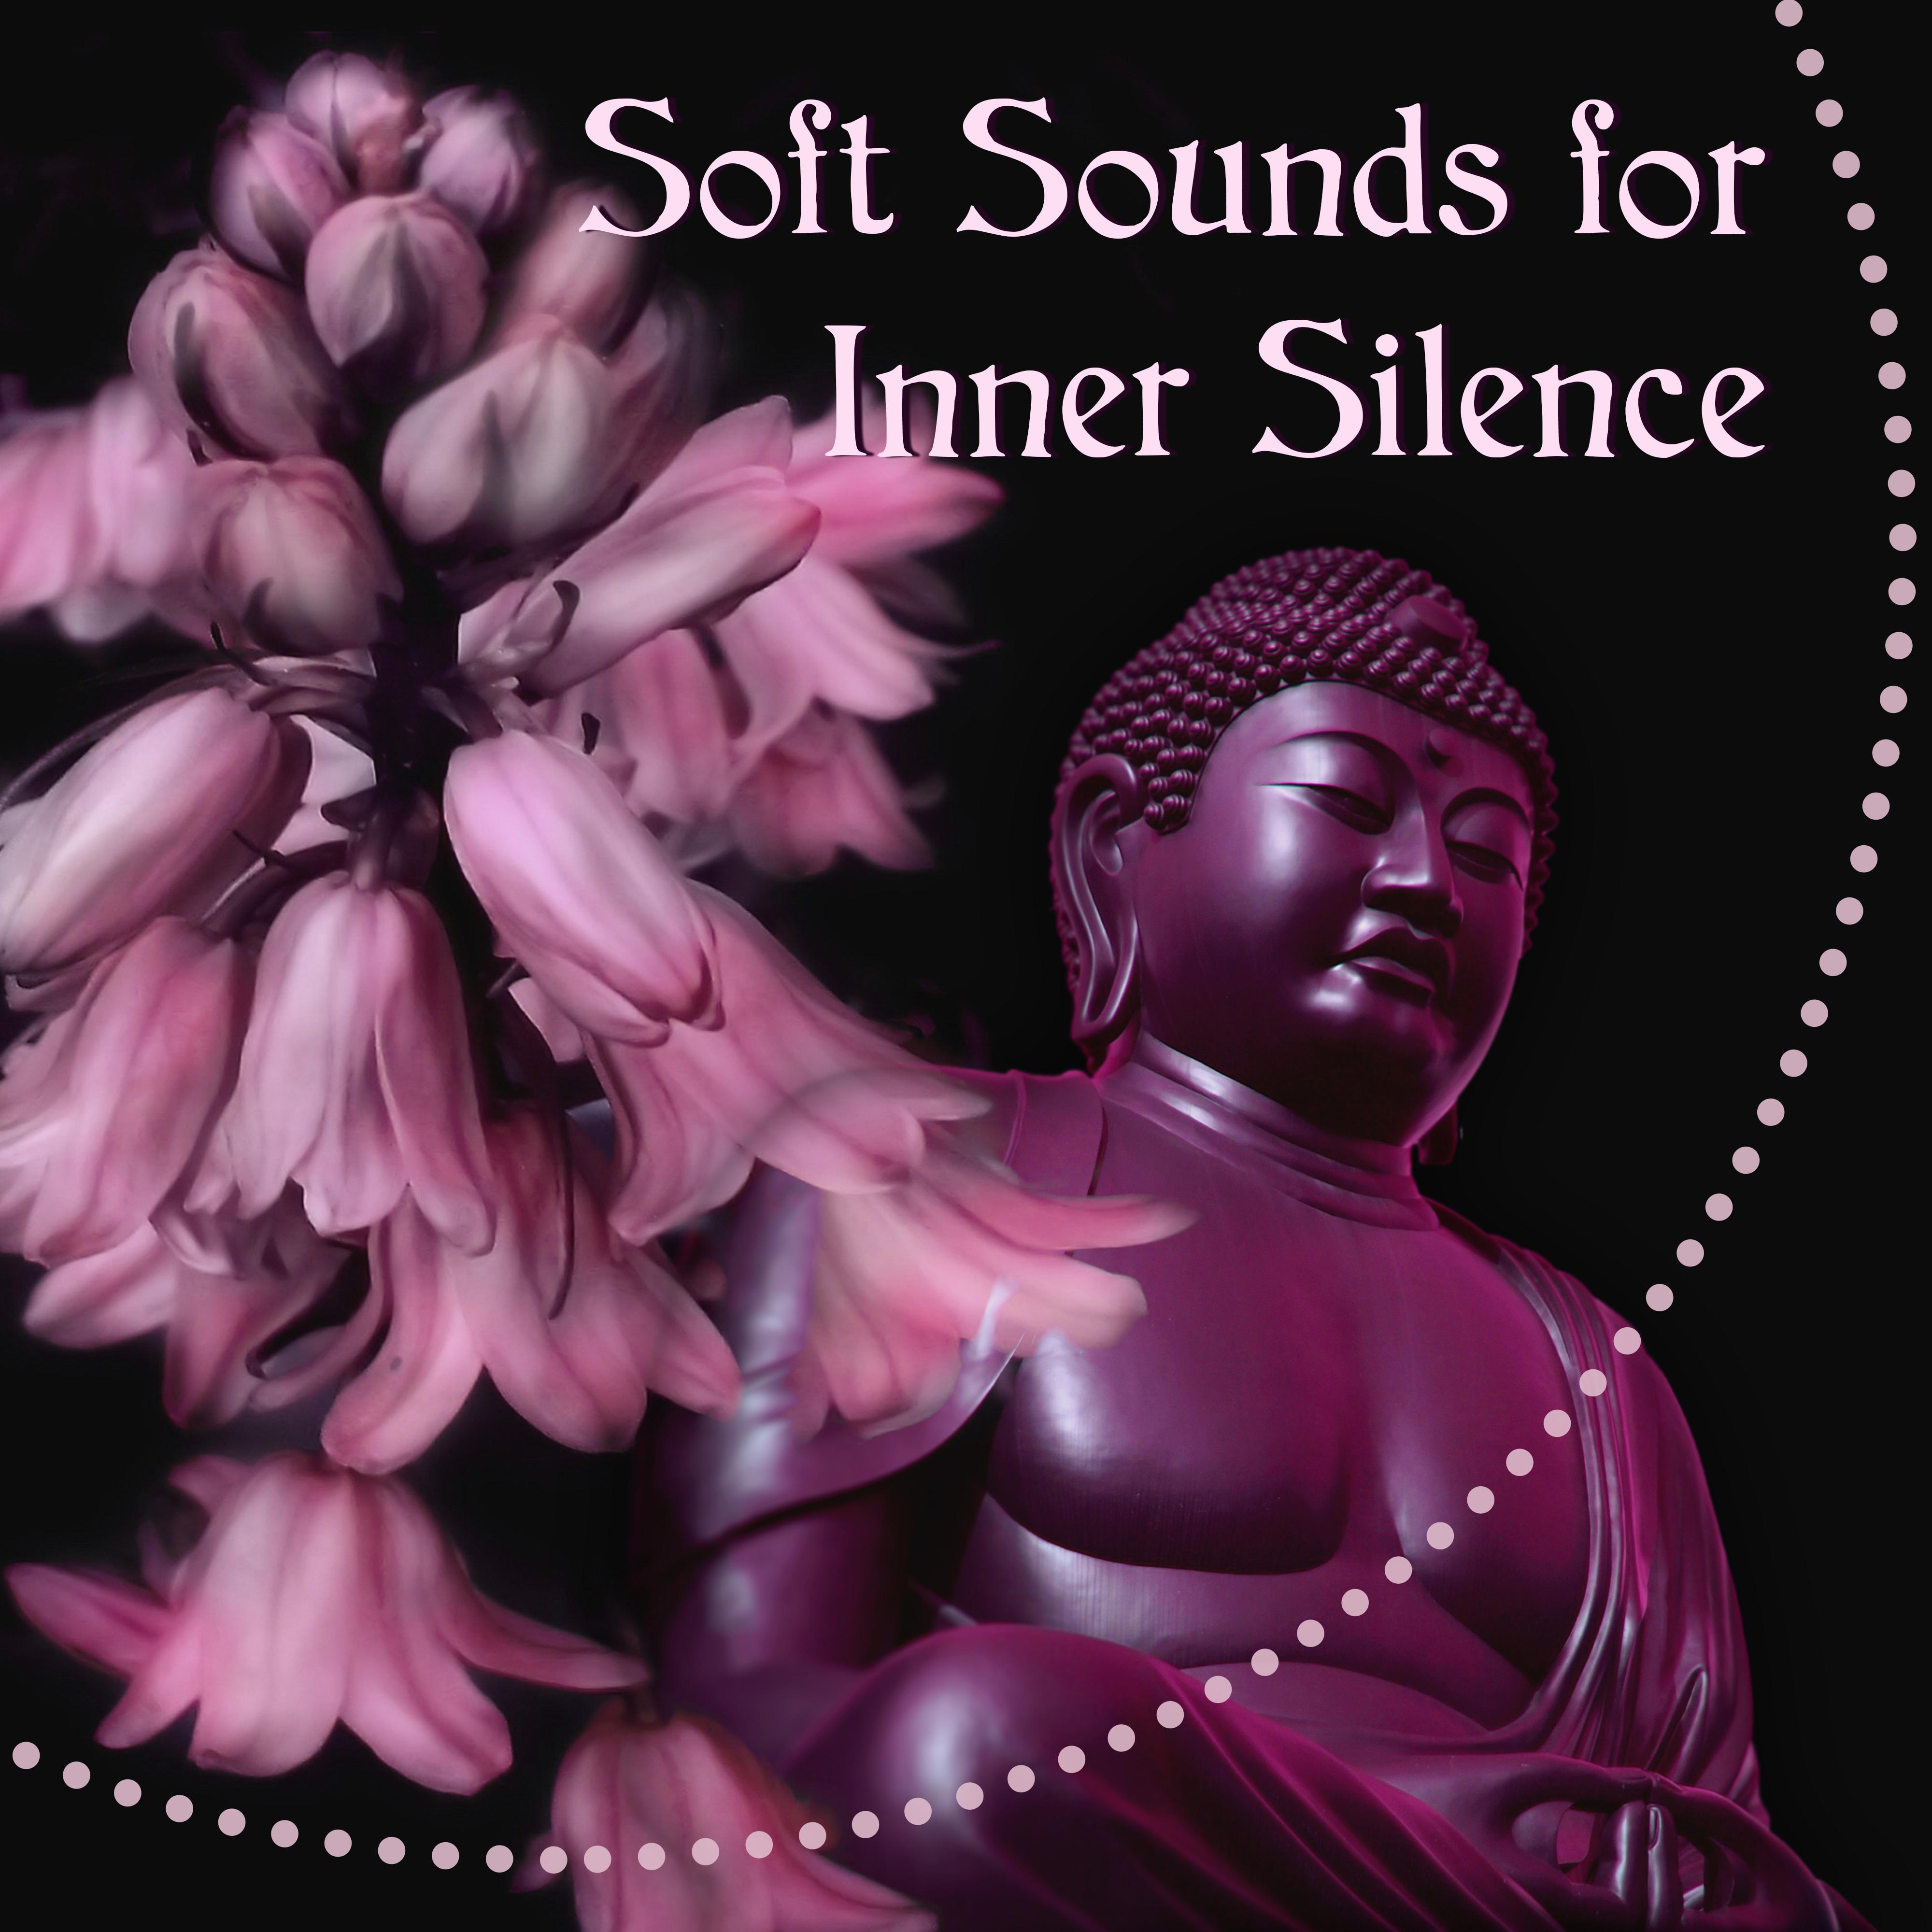 Soft Sounds for Inner Silence – Calming Sounds, Peaceful Mind, Easy Listening, New Age Relaxation, Meditation Music